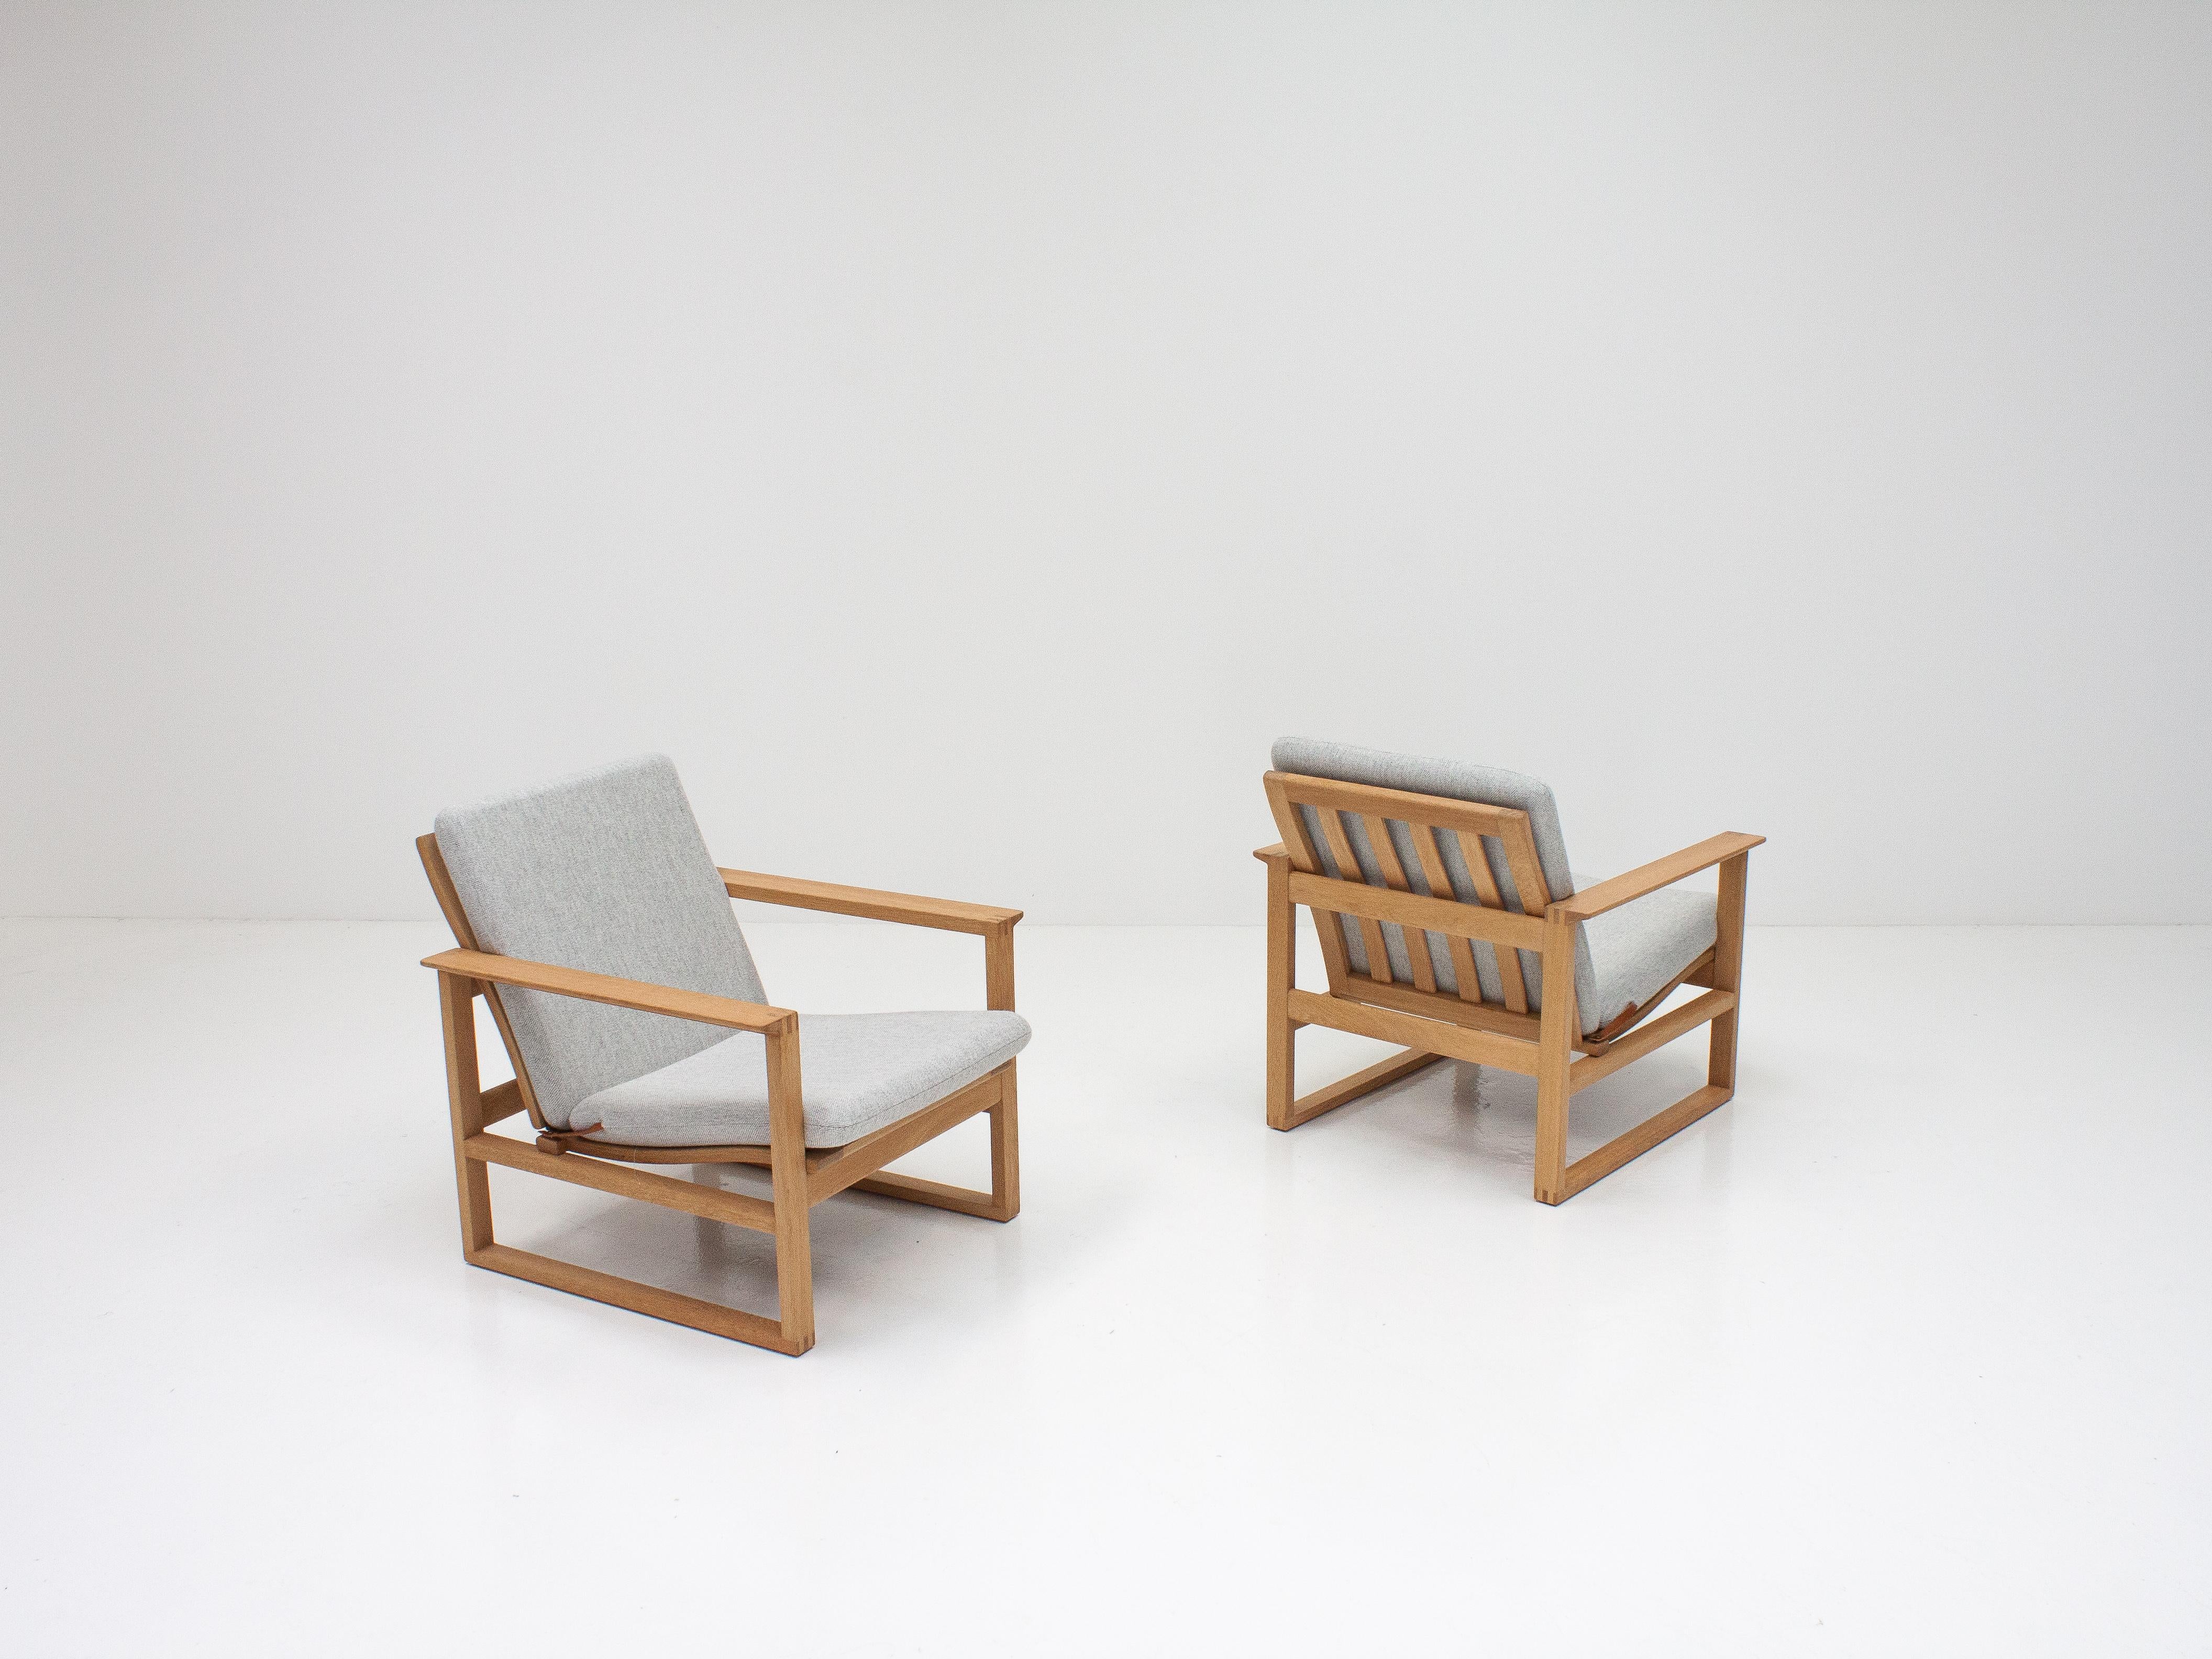 A pair of Børge Mogensen lounge chairs designed in 1956, model number 2256 for Fredericia Stolefabrik. Cubical frames made of solid oak with finger joints, 

Newly reupholstered in Kvadrat Hallingdal 65. The seat cushion can be fixed with a leather